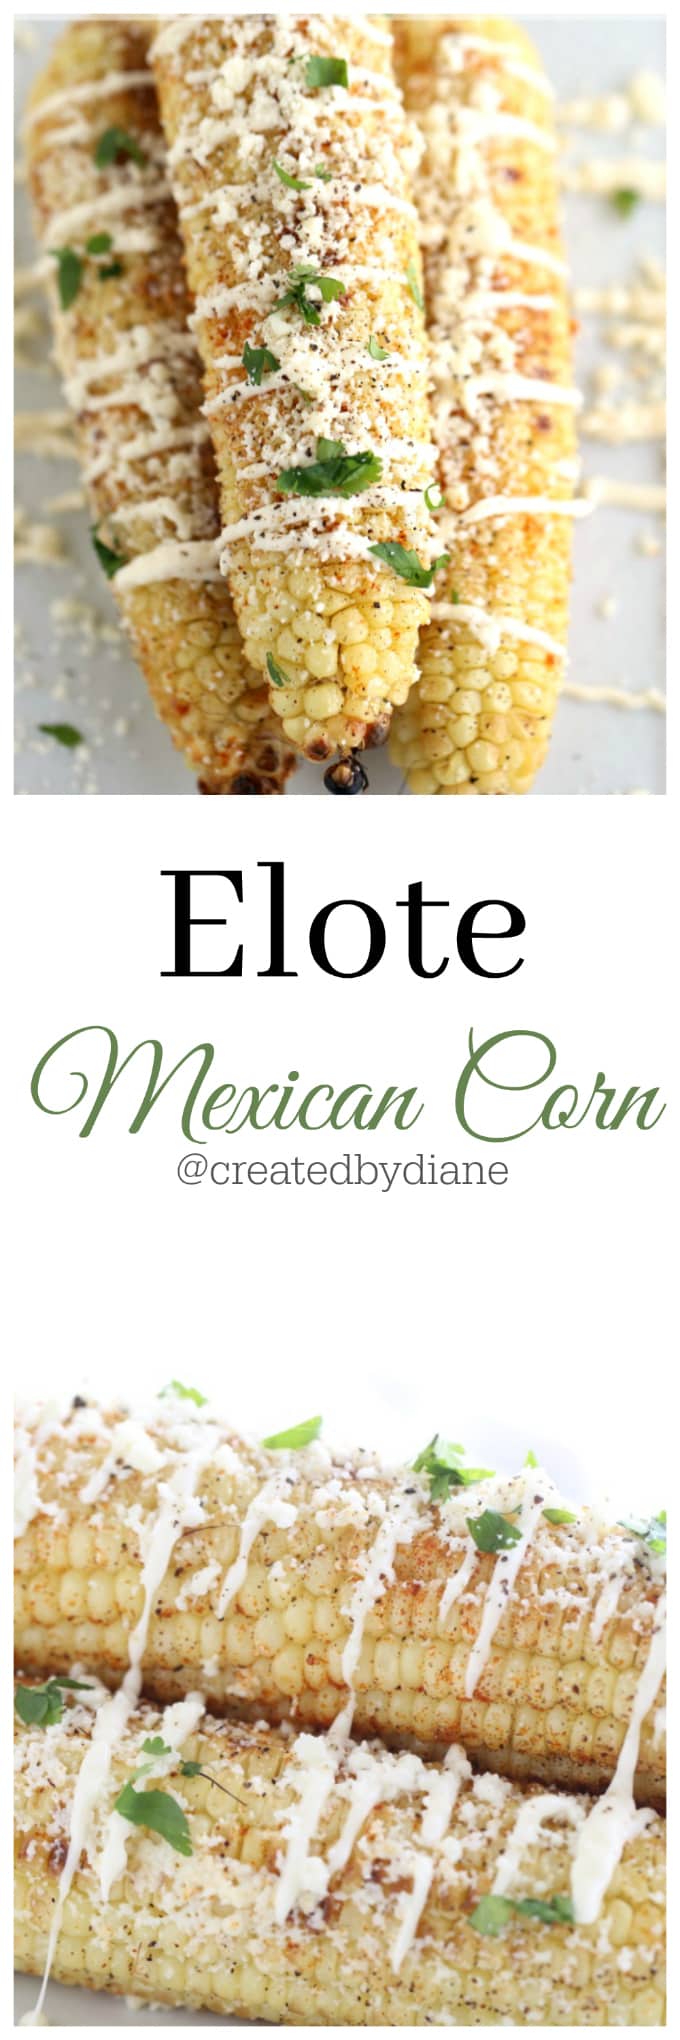 Elote Mexican Corn recipe make it on the grill or in the oven @createdbydiane @createdbydiane